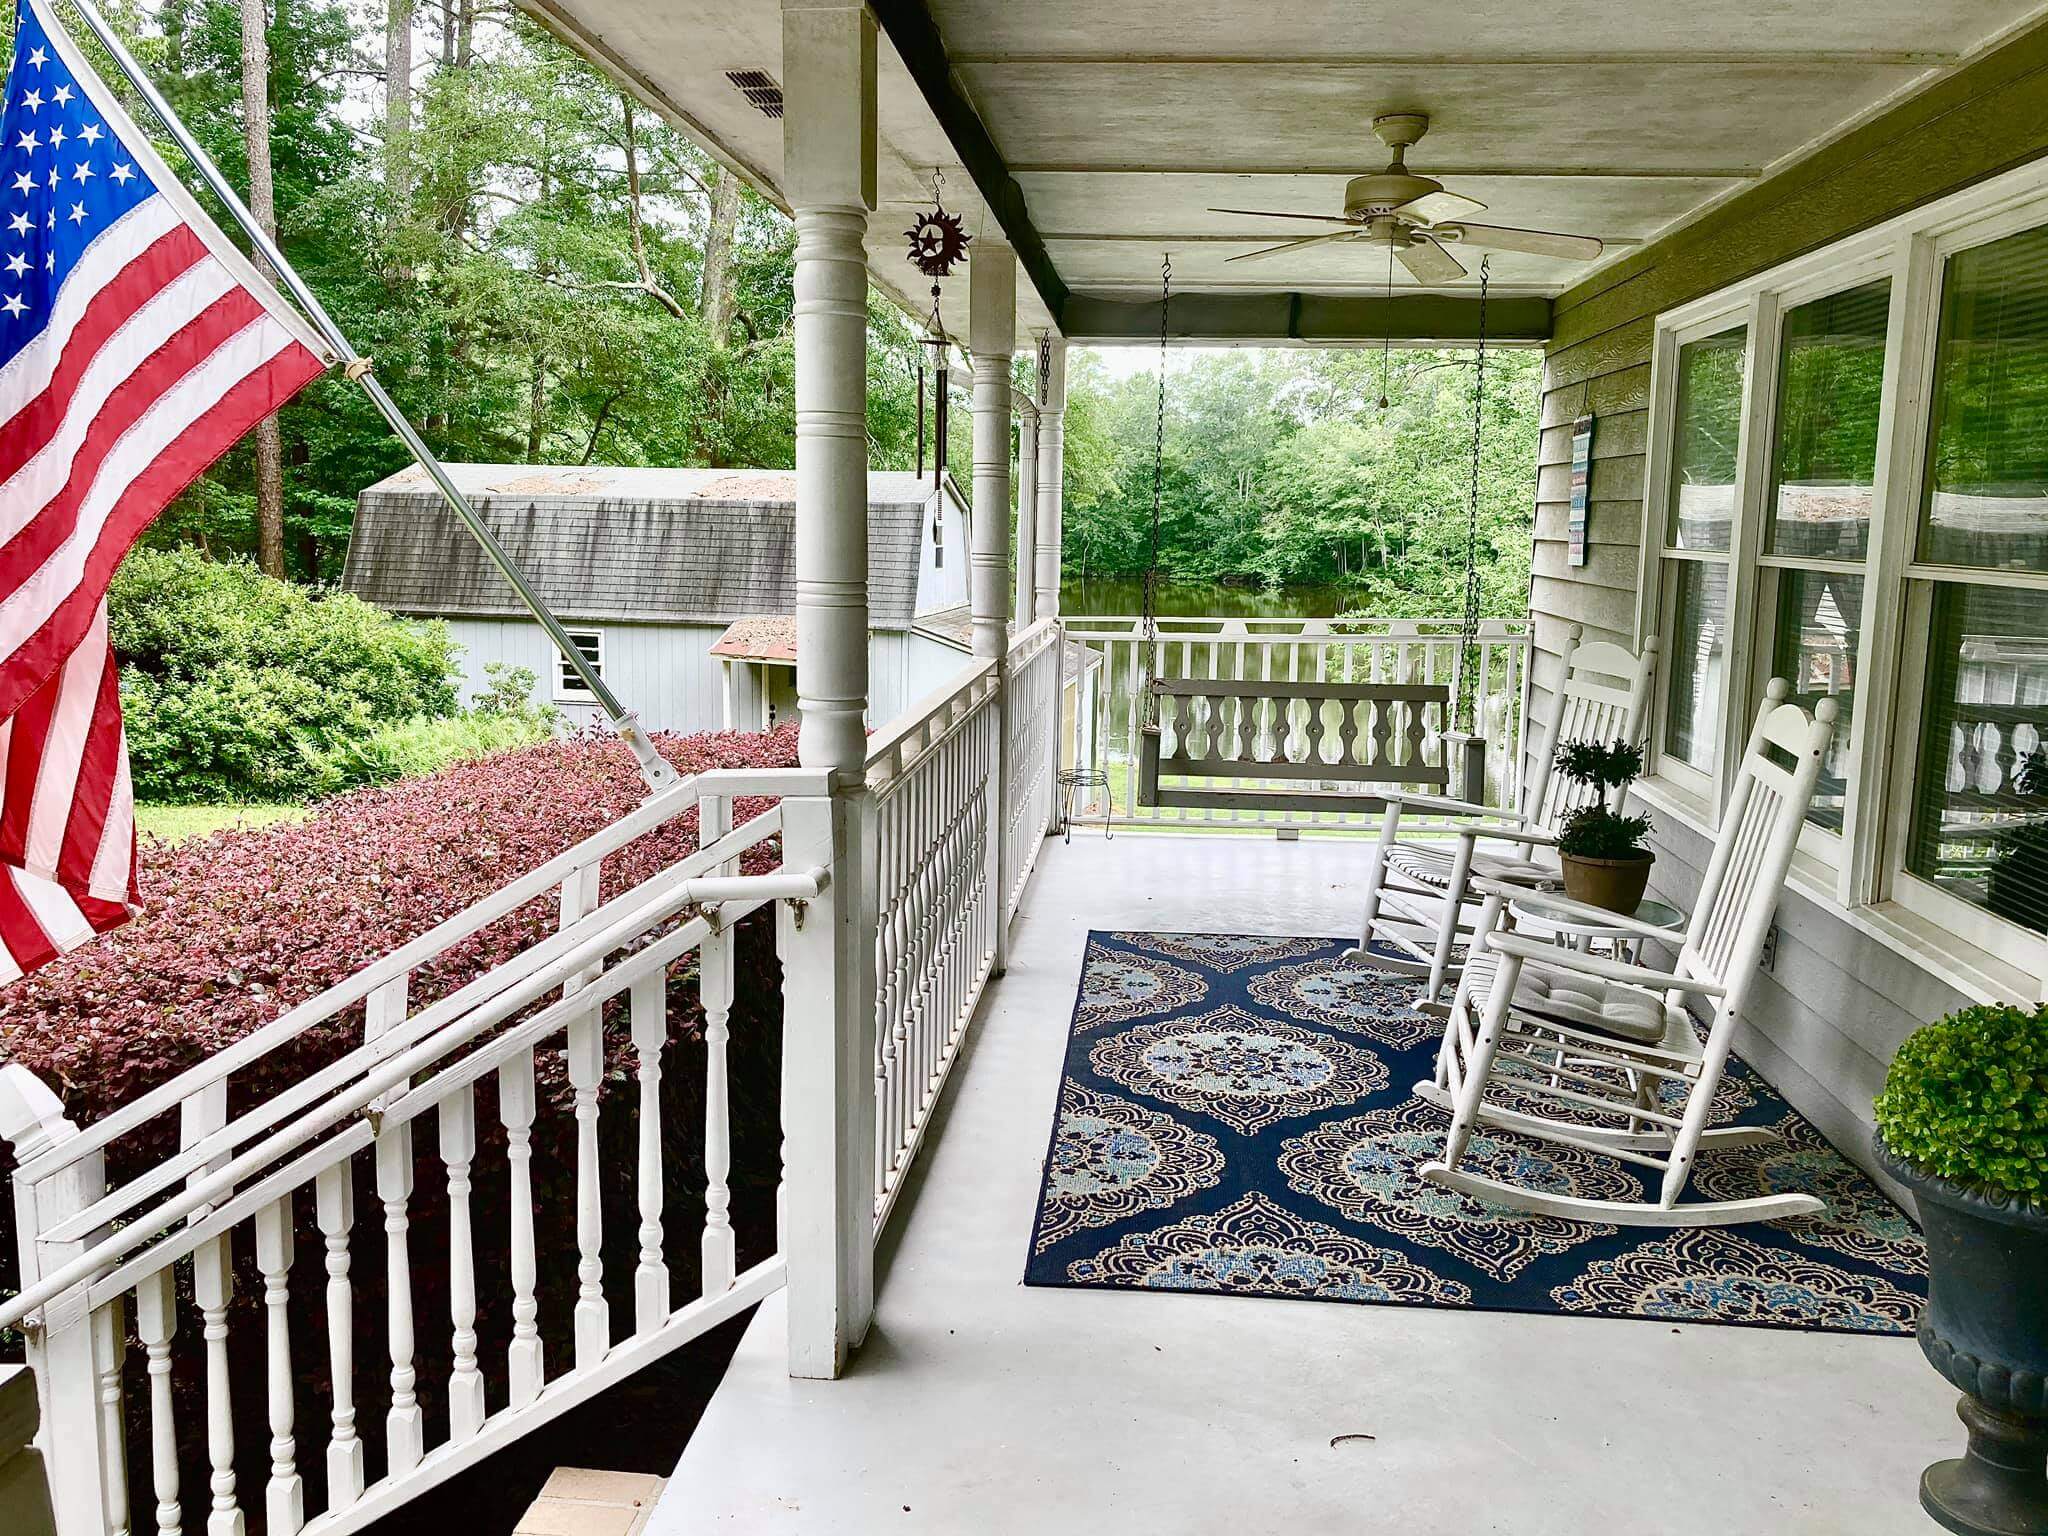 Porch - Rocking Chairs - American Flag